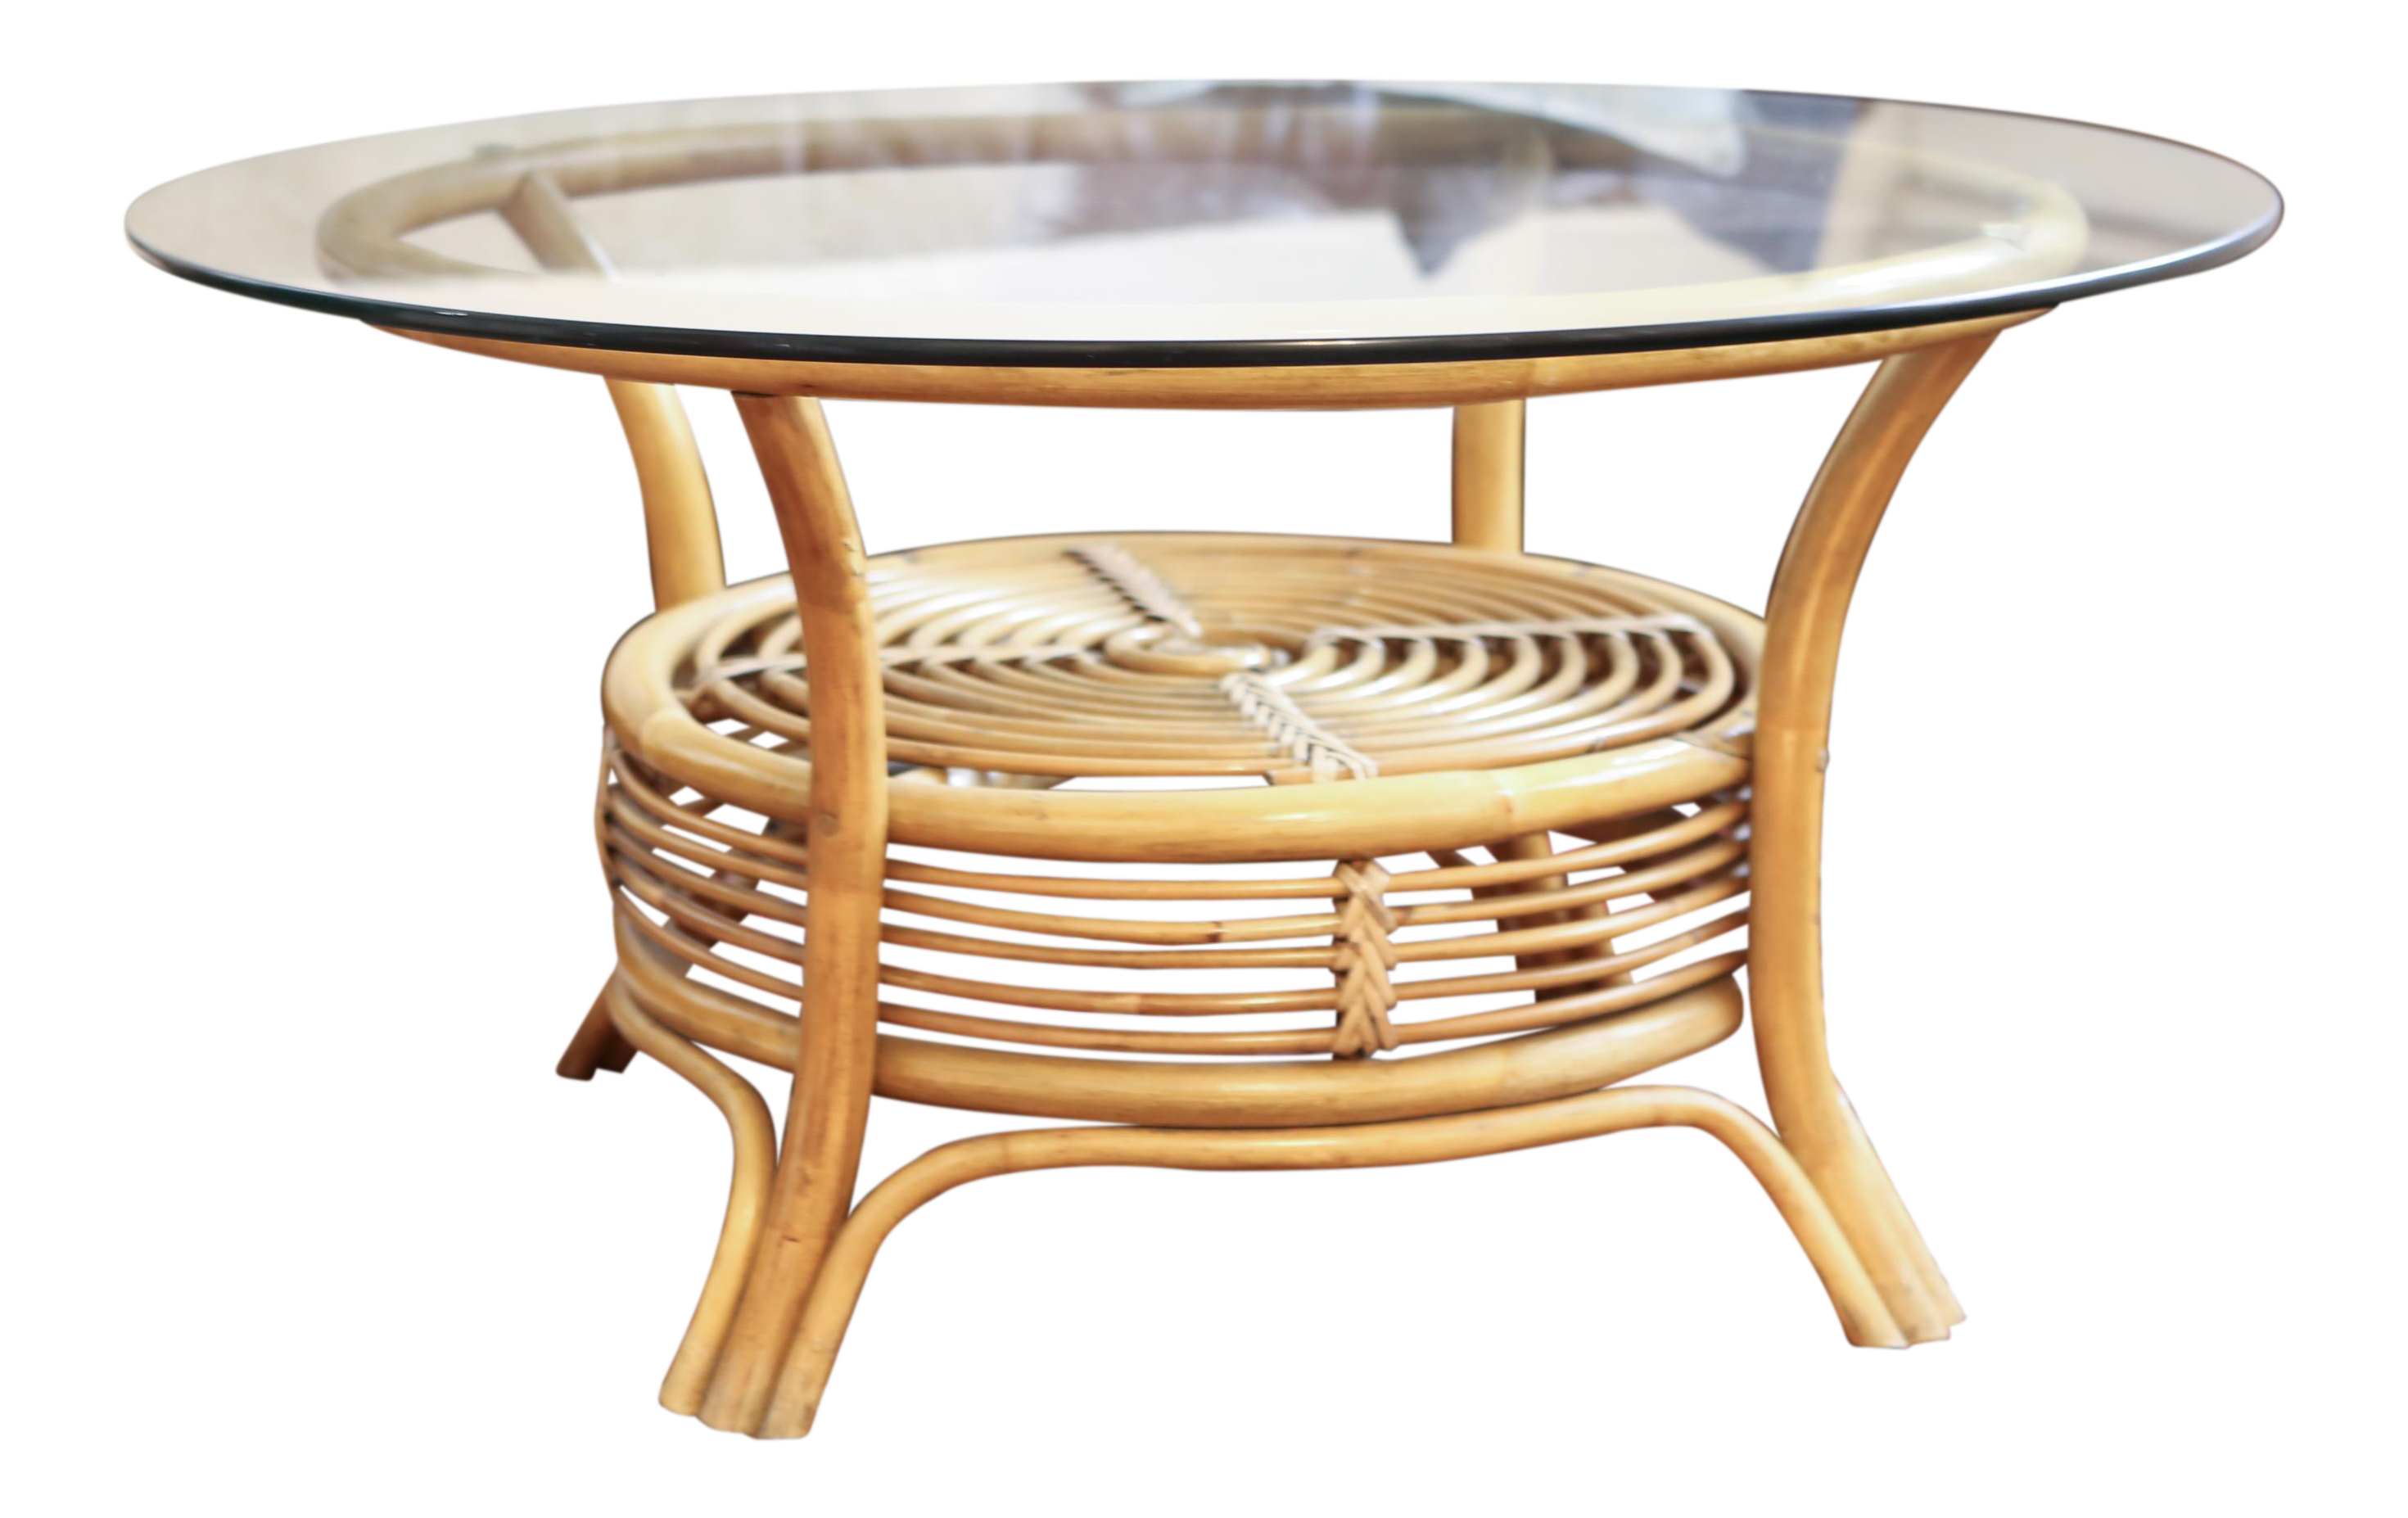 round rattan coffee table with glass top answerplane end tables etsy kitchen john keal for brown saltman white tempered dining home hardware patio loungers weekly time black